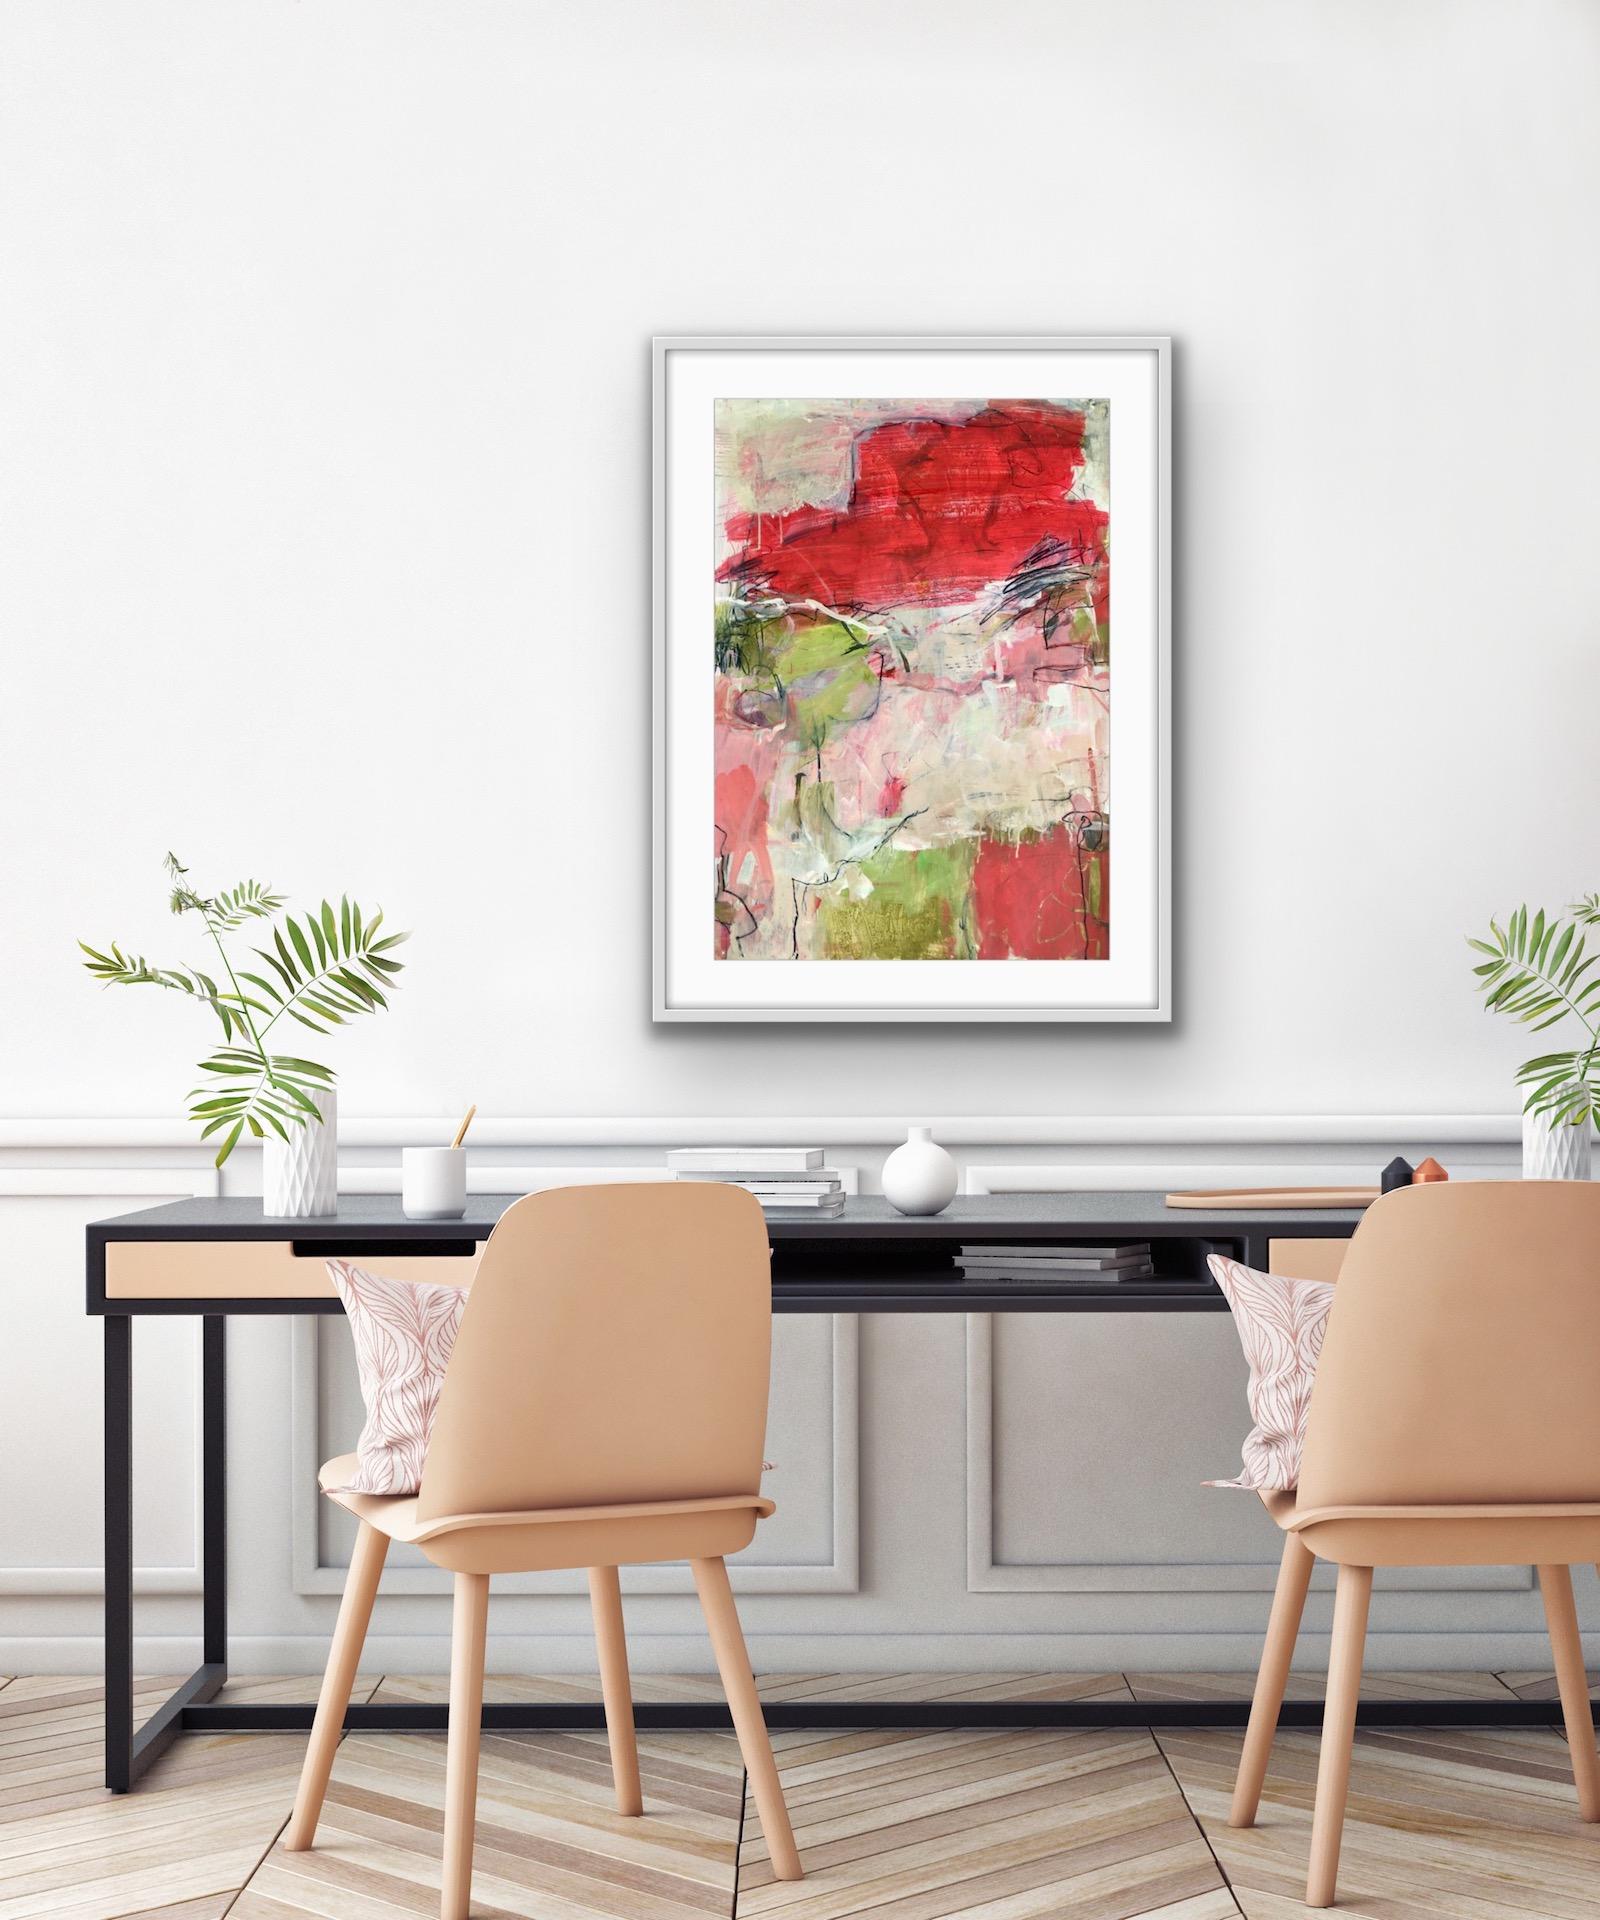 Red Rocks by Janet Keith [2019]
Original
Acrylic paint on heavy watercolour paper
Image size: H:84 cm x W:59.5 cm
Complete Size of Unframed Work: H:84 cm x W:59.5 cm x D:0.10cm
Sold Unframed
Please note that insitu images are purely an indication of